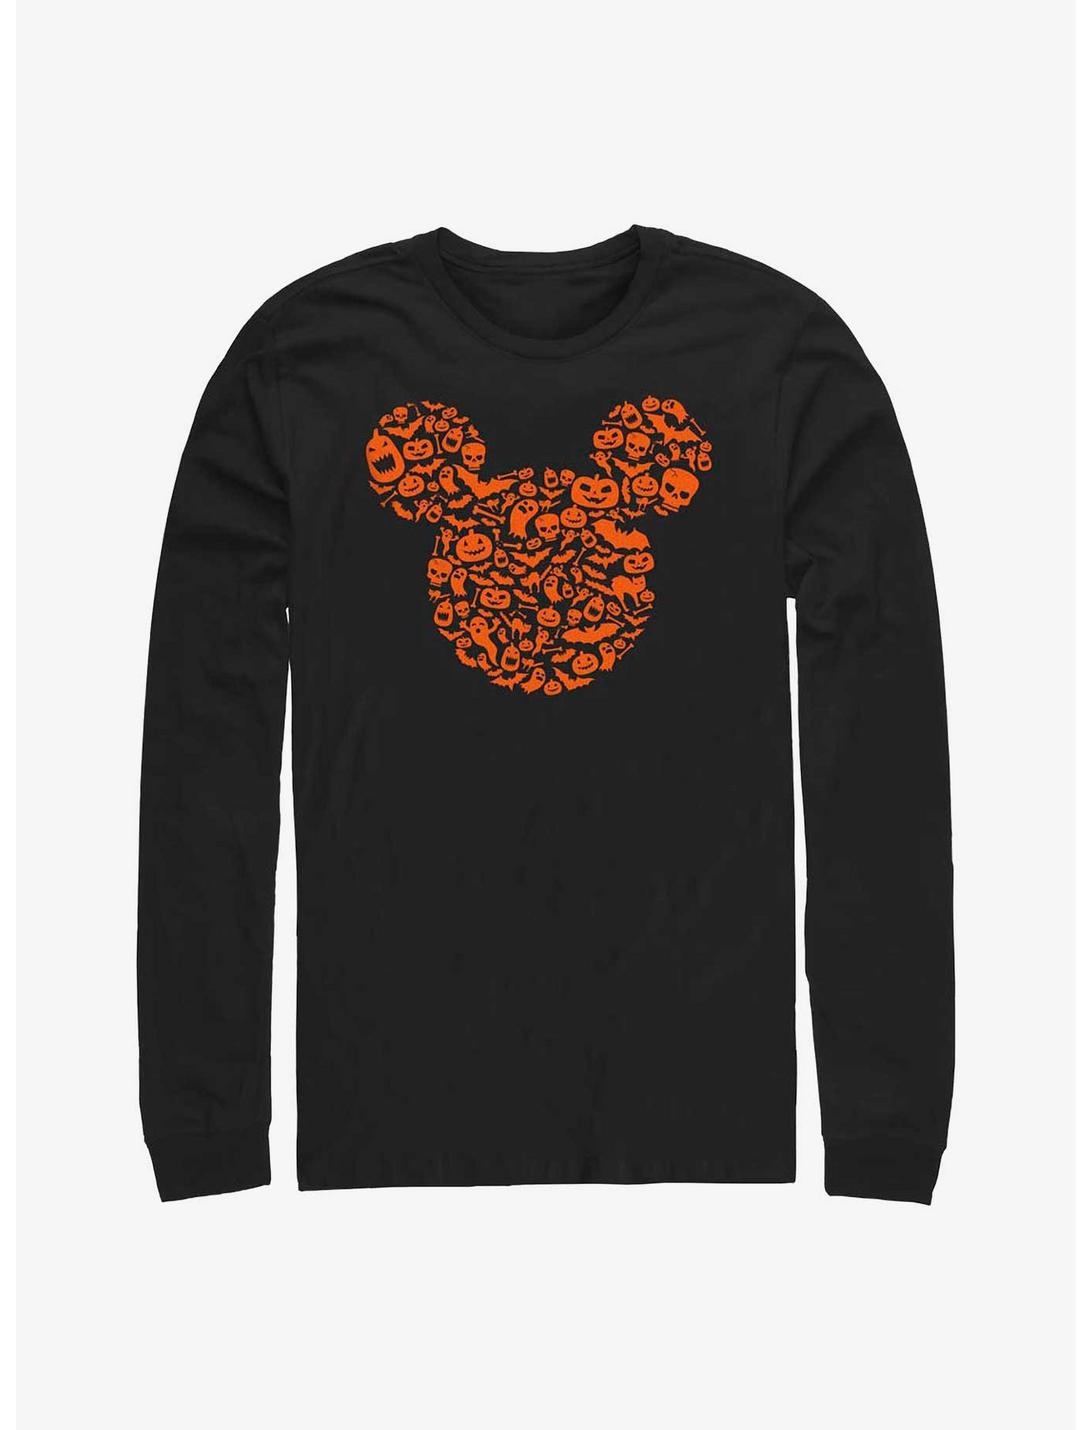 Disney Mickey Mouse Mouse Ears Halloween Icons Long-Sleeve T-Shirt, BLACK, hi-res